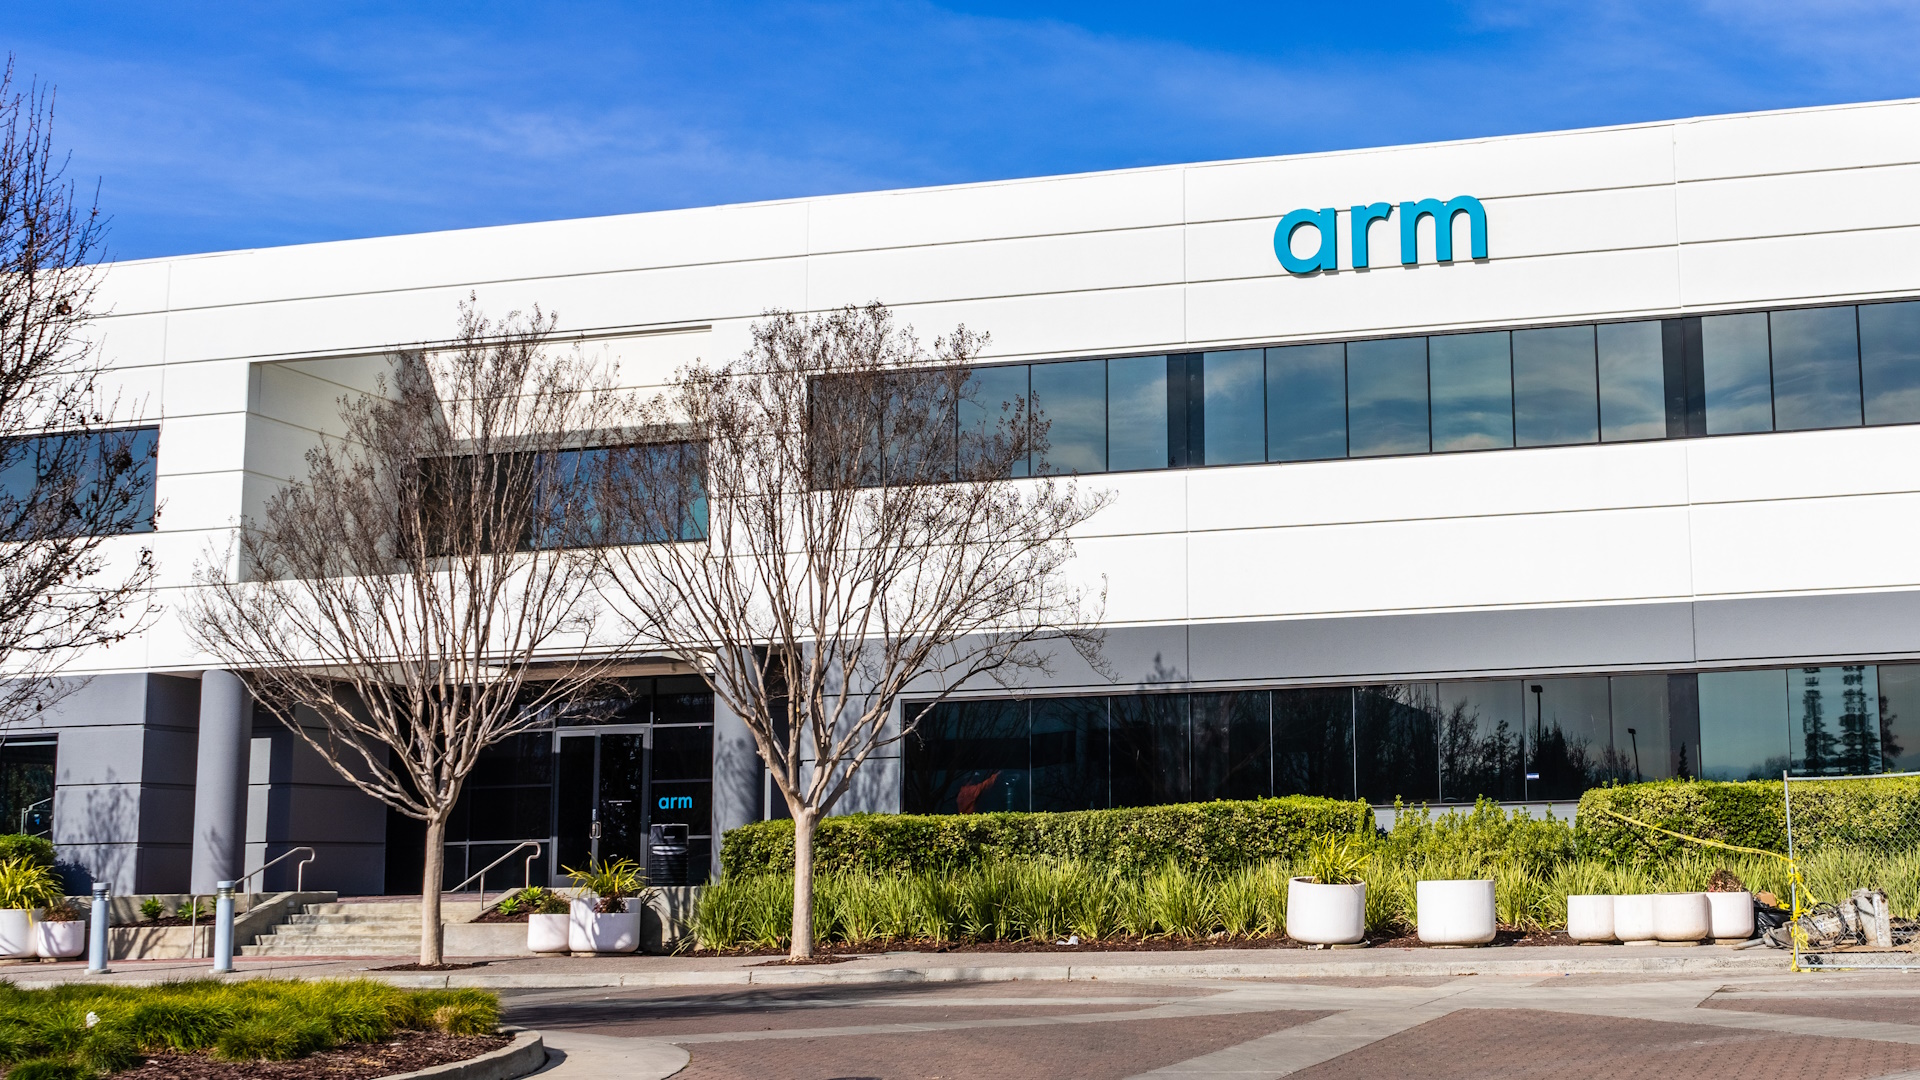 Arm submits IPO request to go public in the US, targeting a capital of $70 billion.